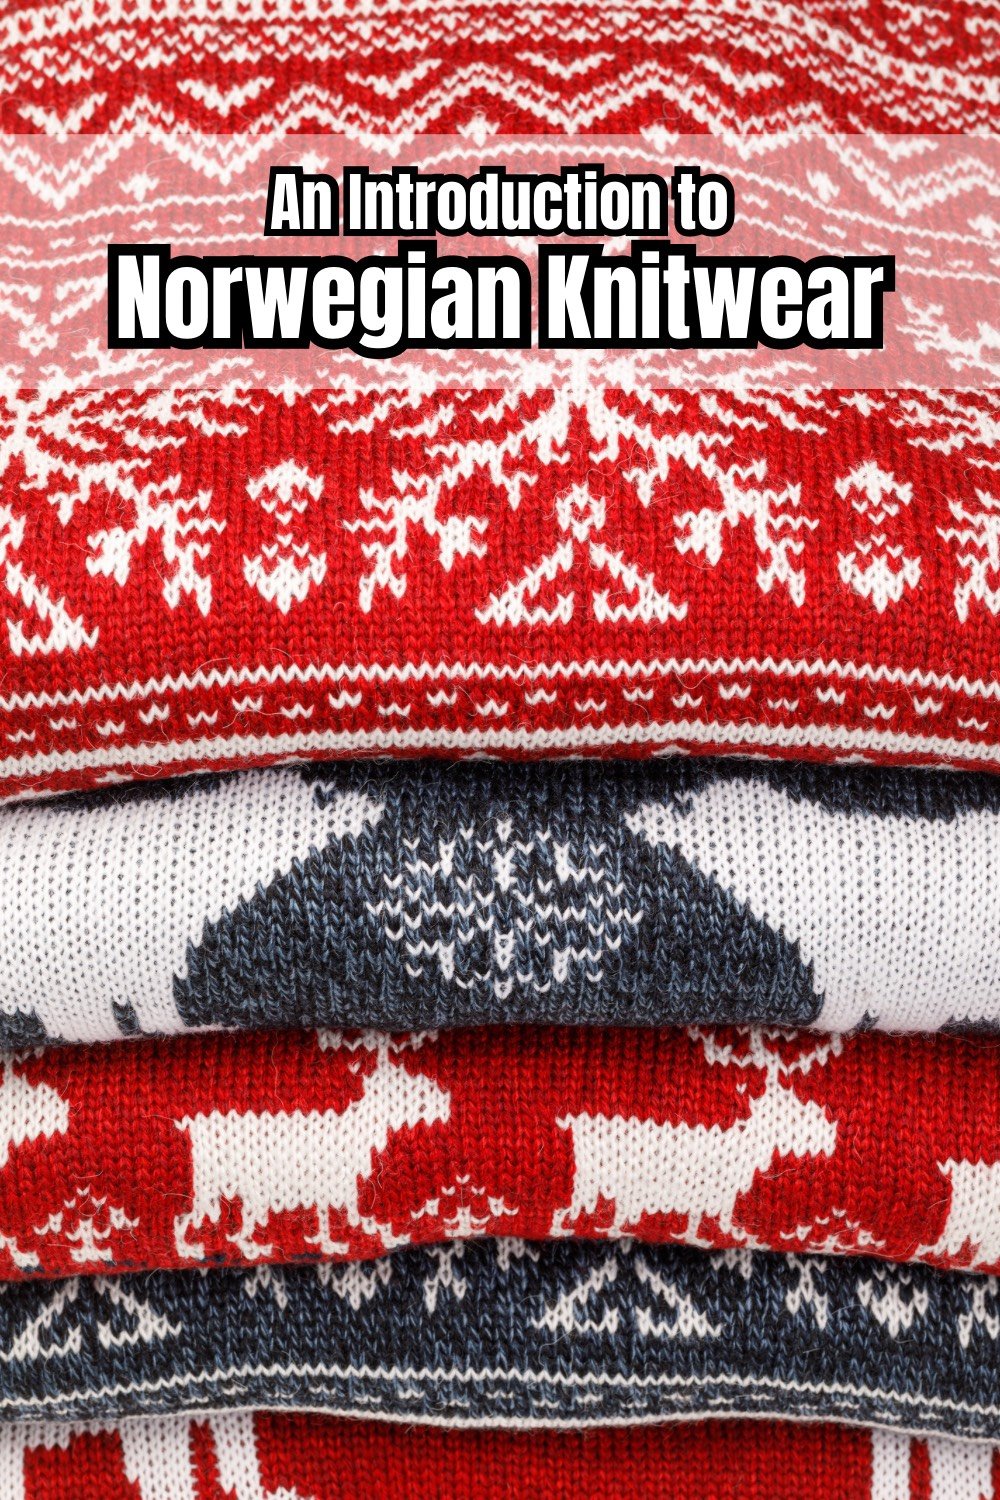 An Introduction to Norwegian Knitwear